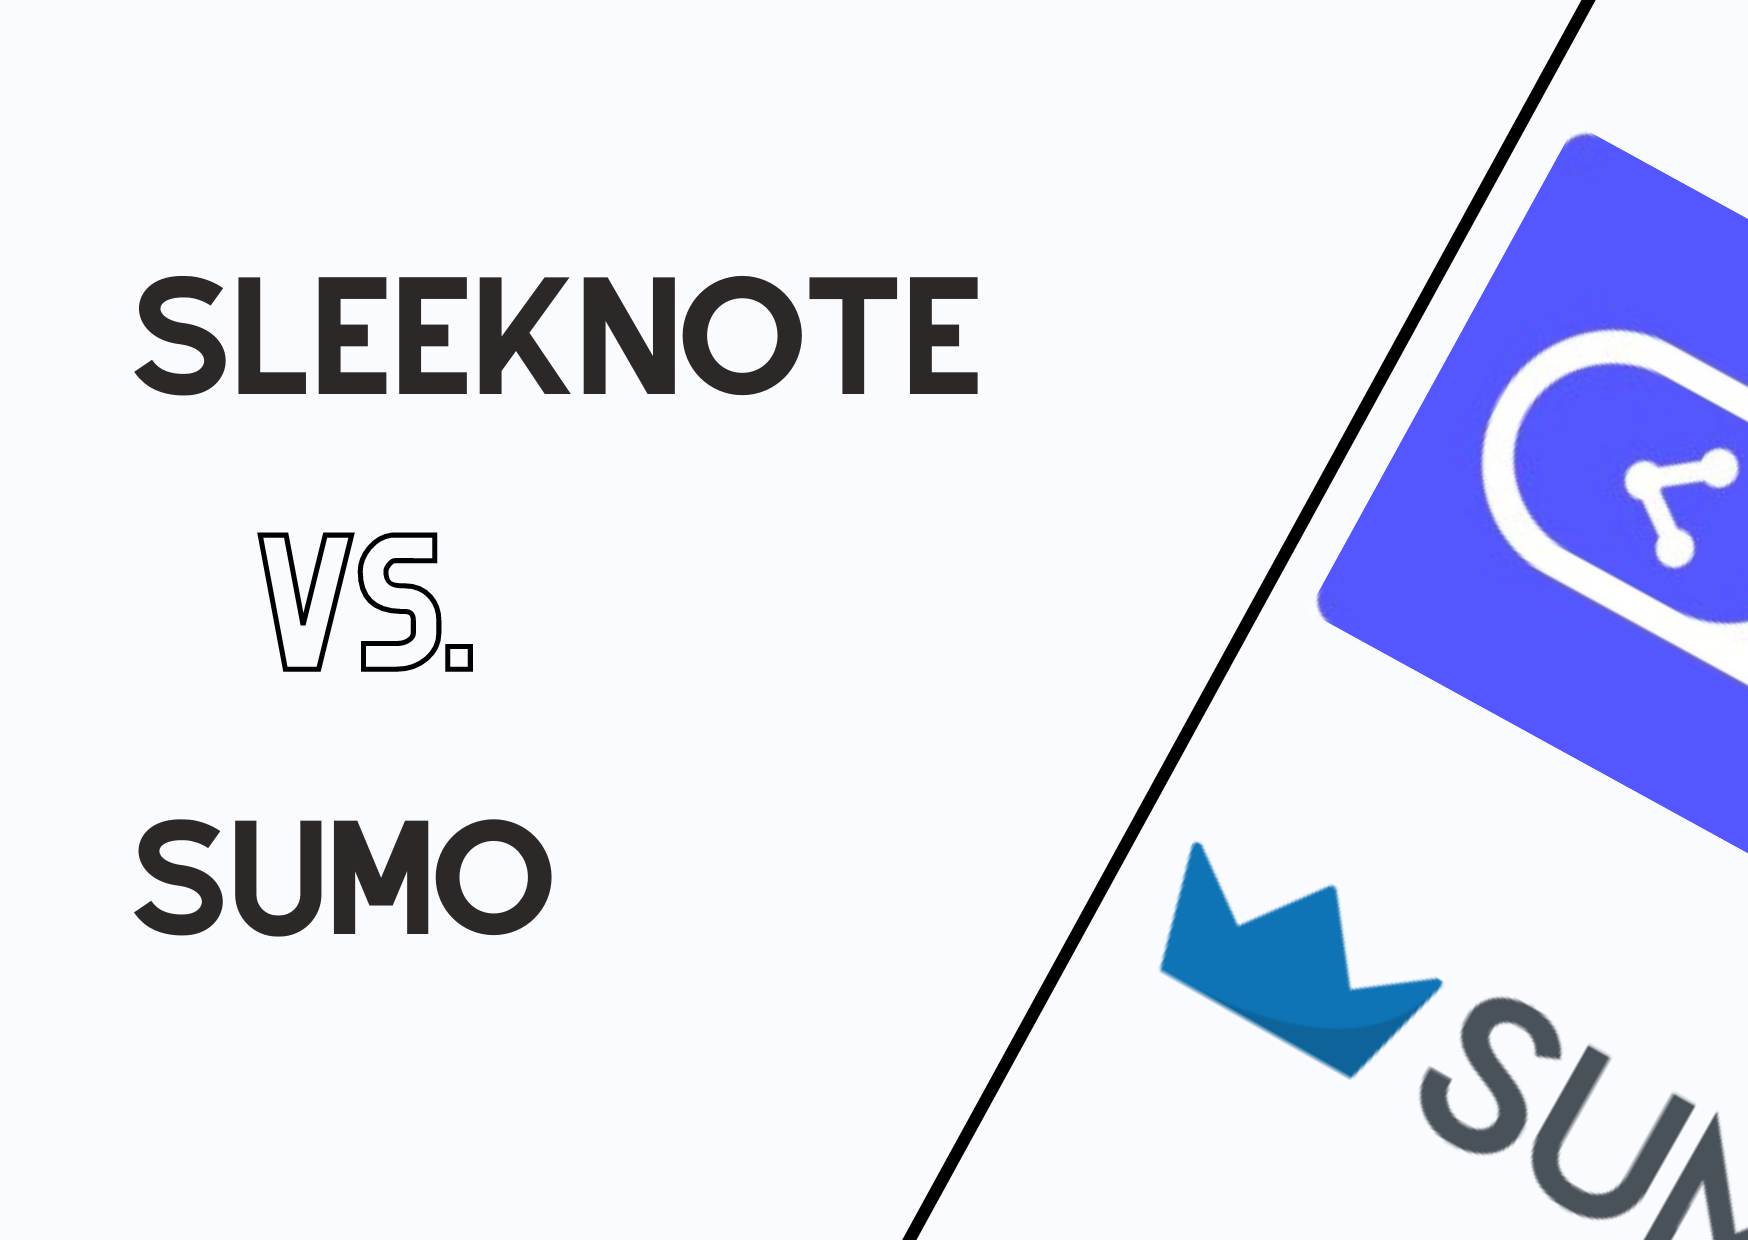 the comparison image of Sleeknote and Sumo with the logos